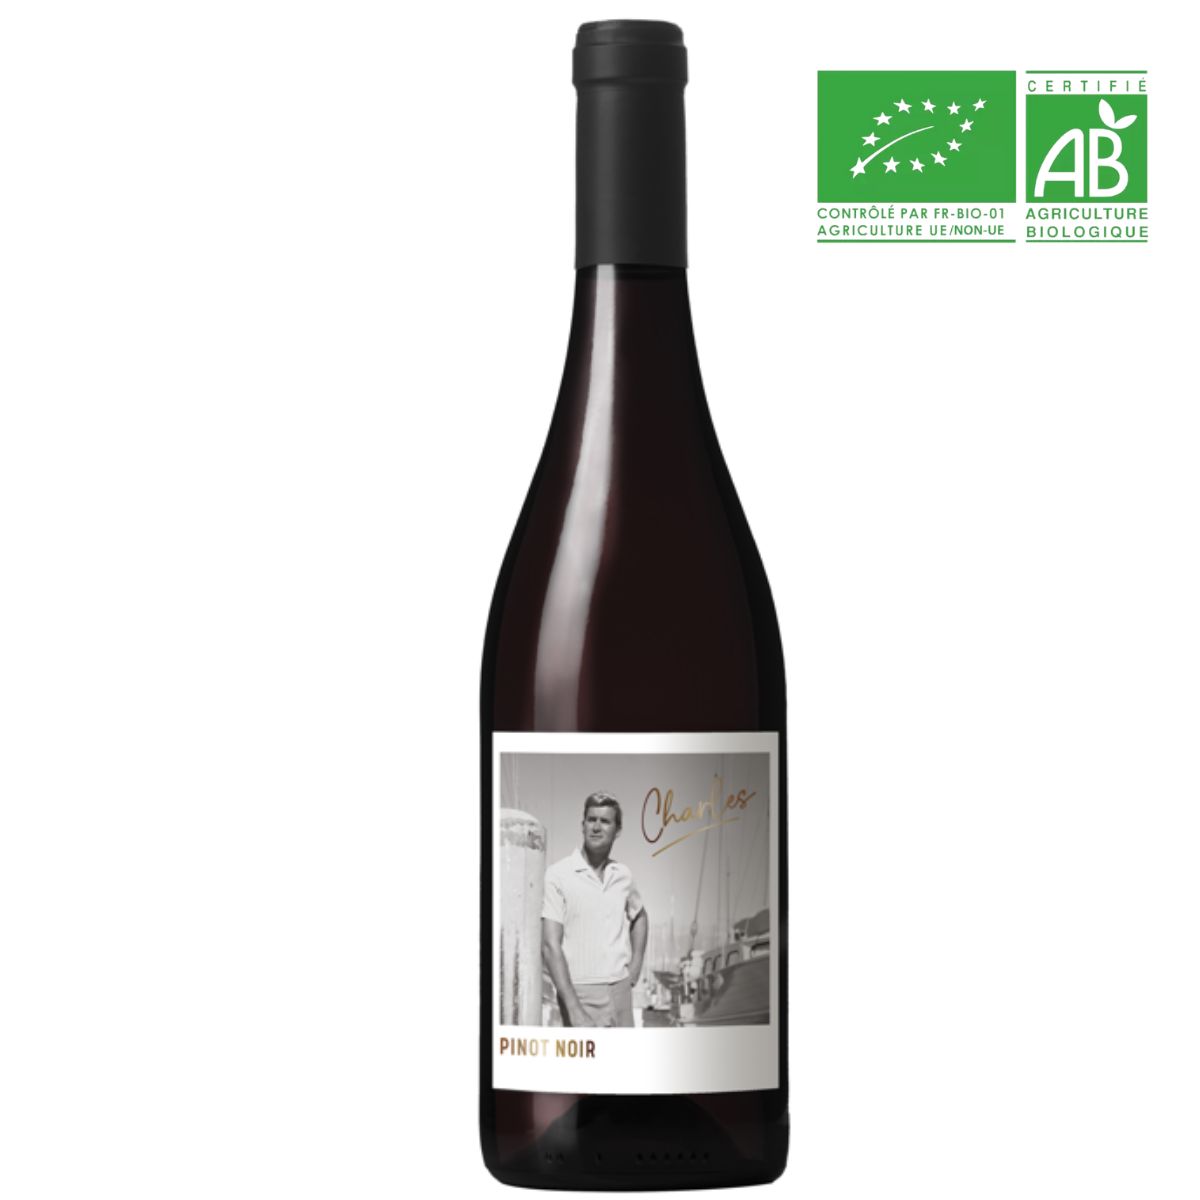 Charles Pinot Noir 2021 - Domaine Fabre Gouyric